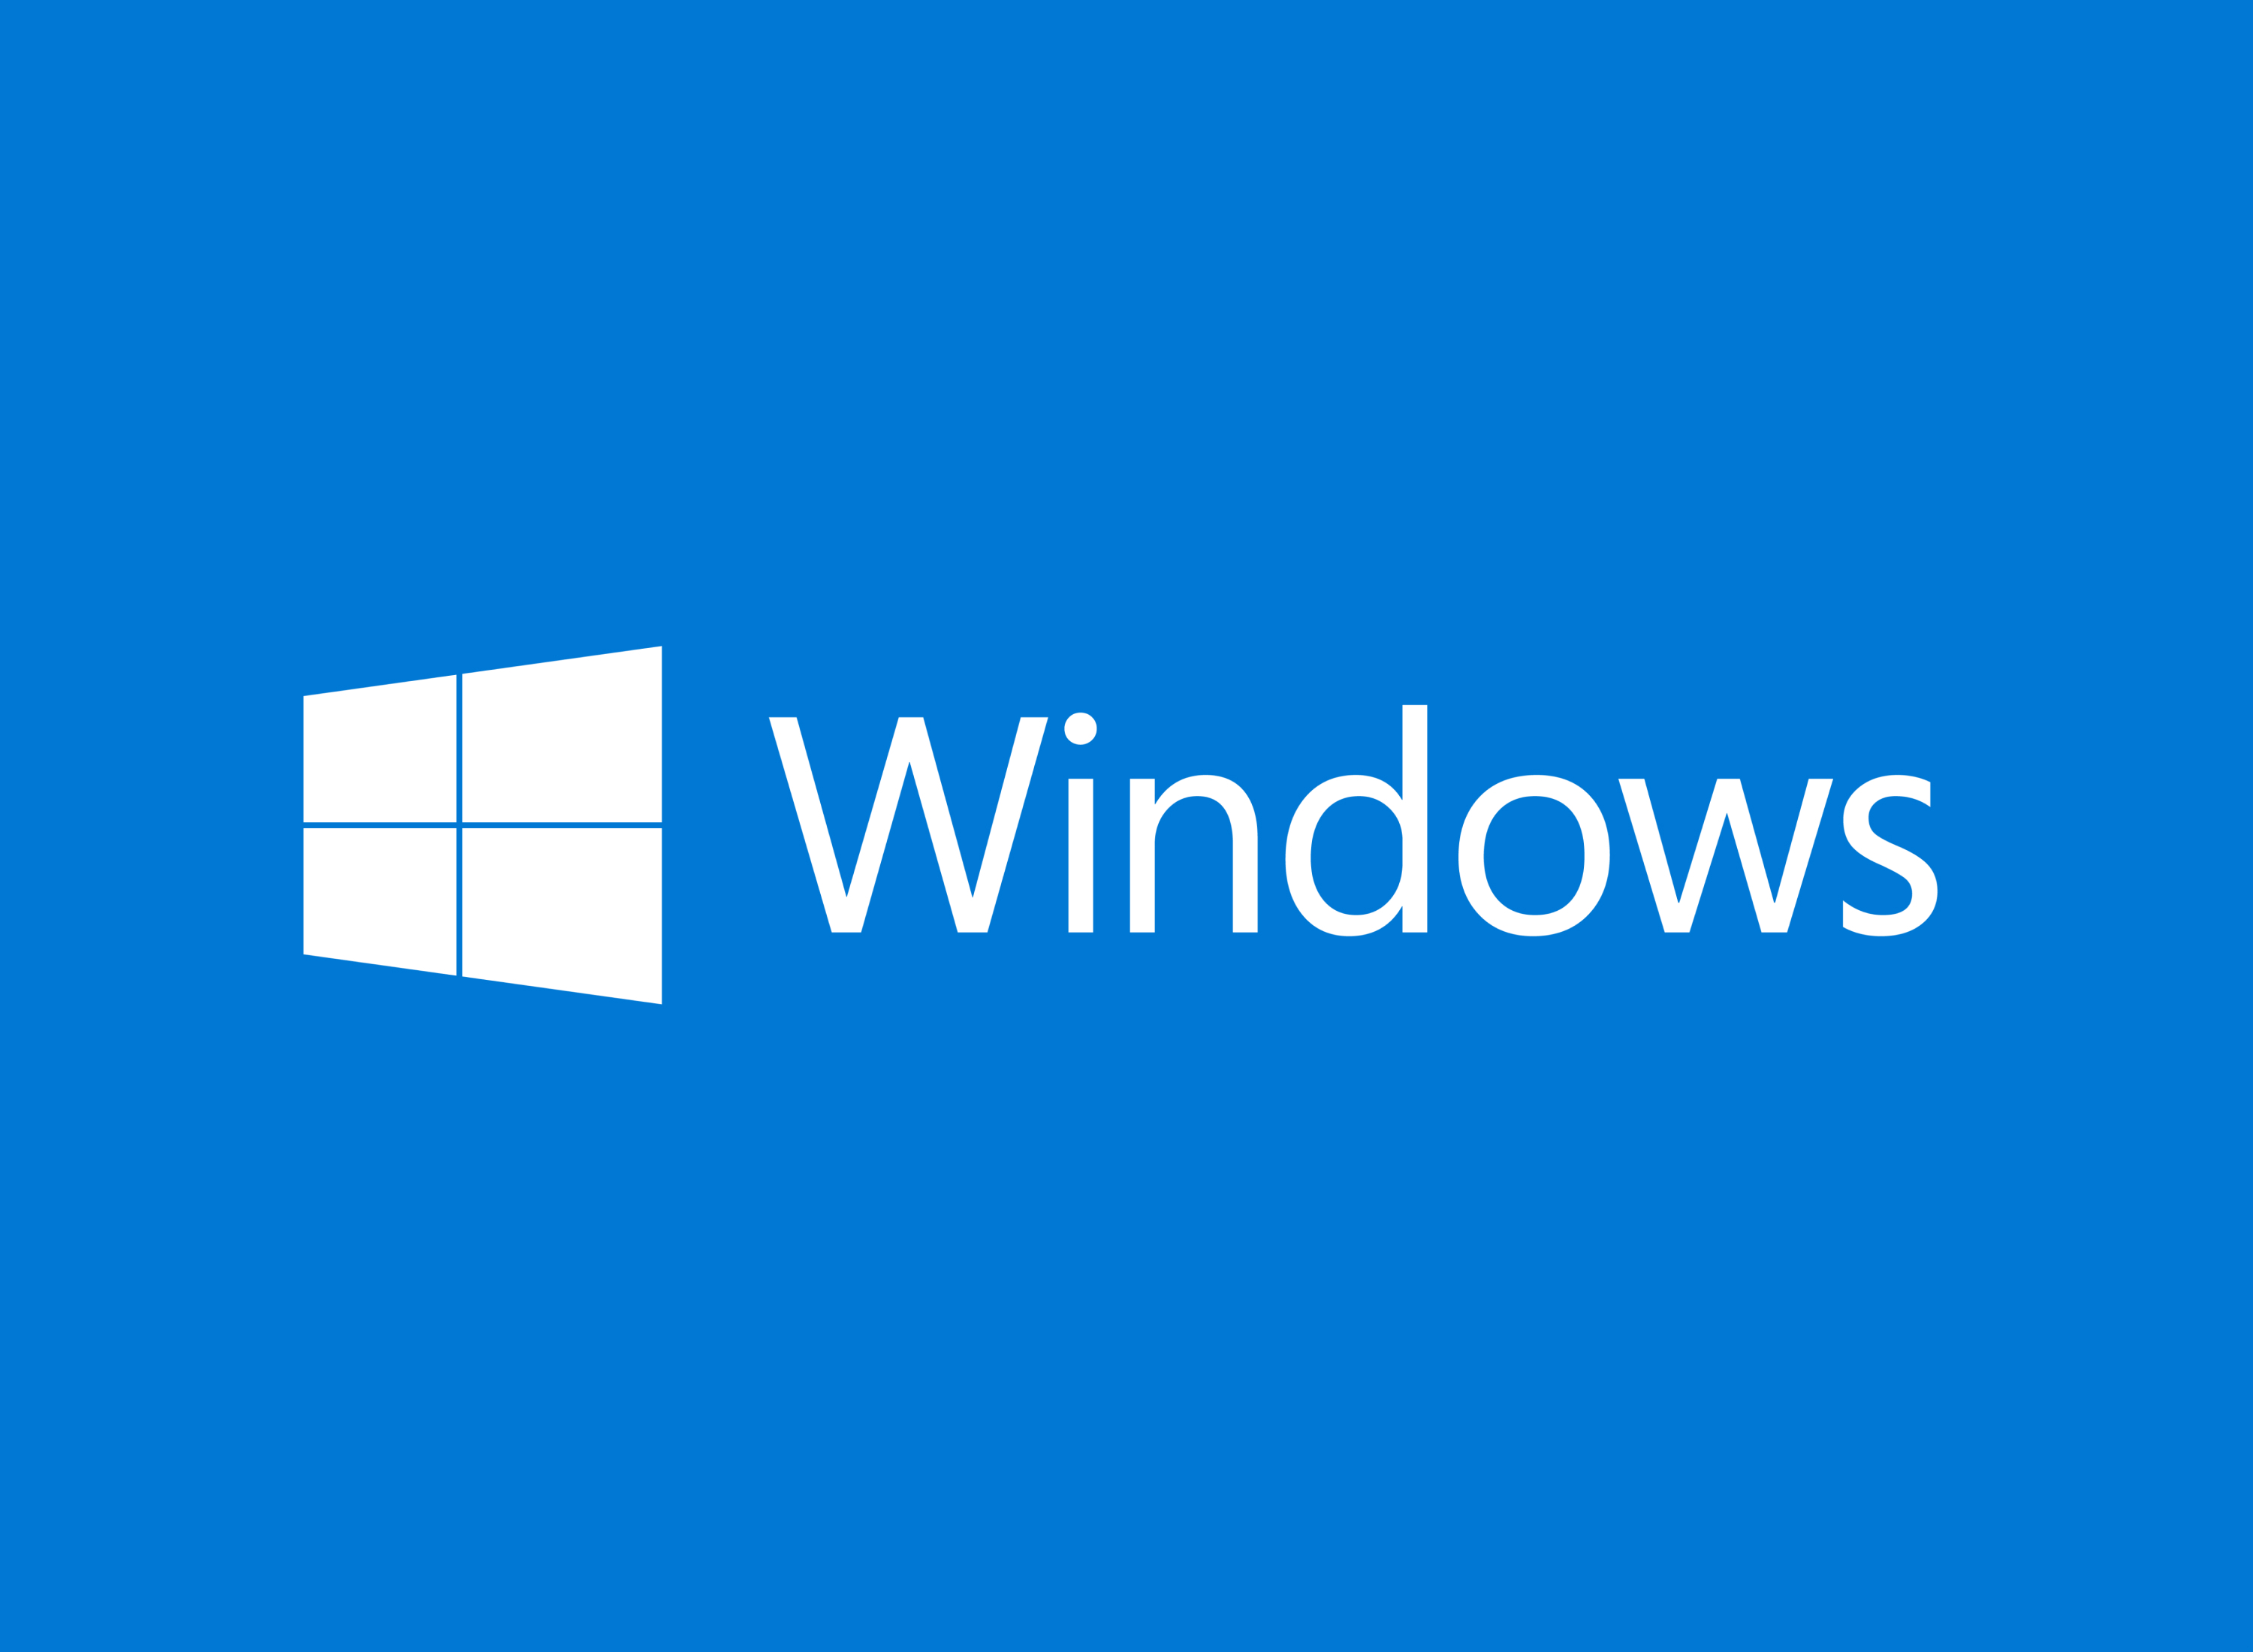 Announcing Windows 10 Insider Preview Build 21387